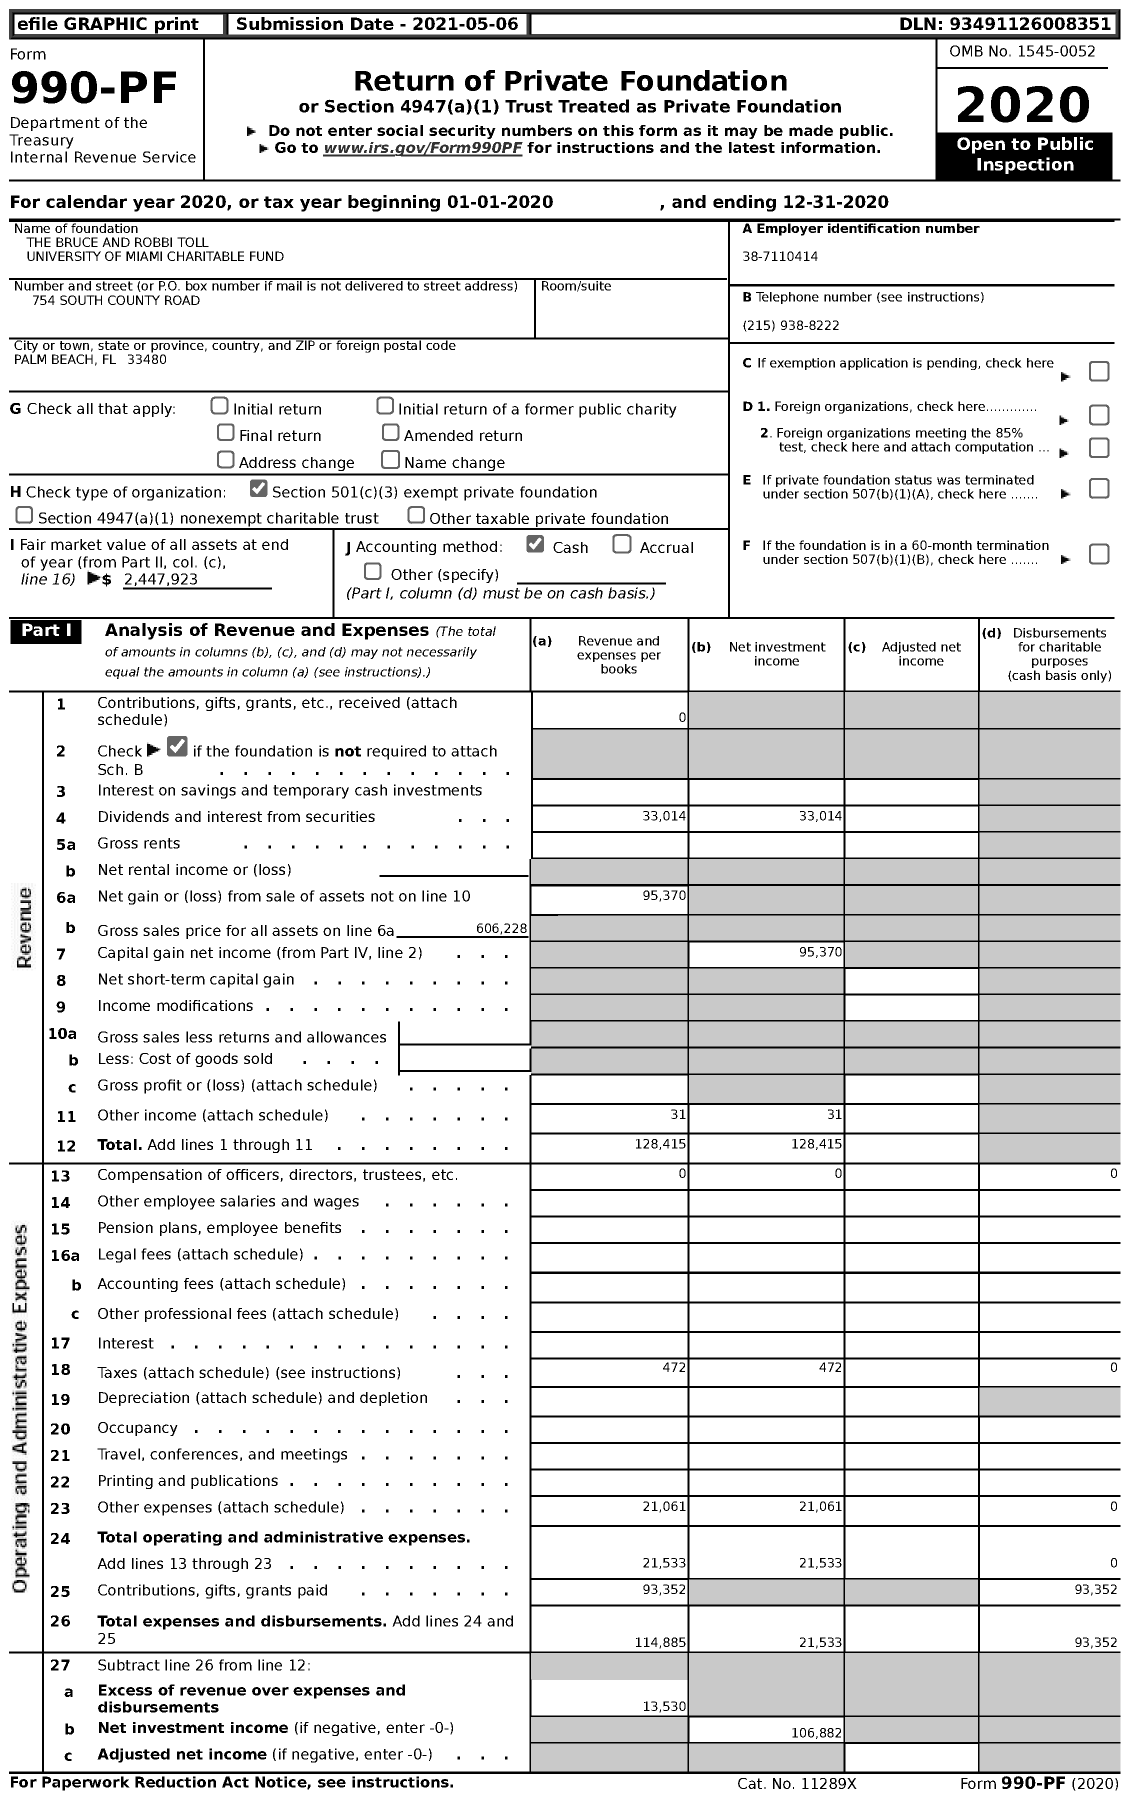 Image of first page of 2020 Form 990PF for The Bruce and Robbi Toll University of Miami Charitable Fund